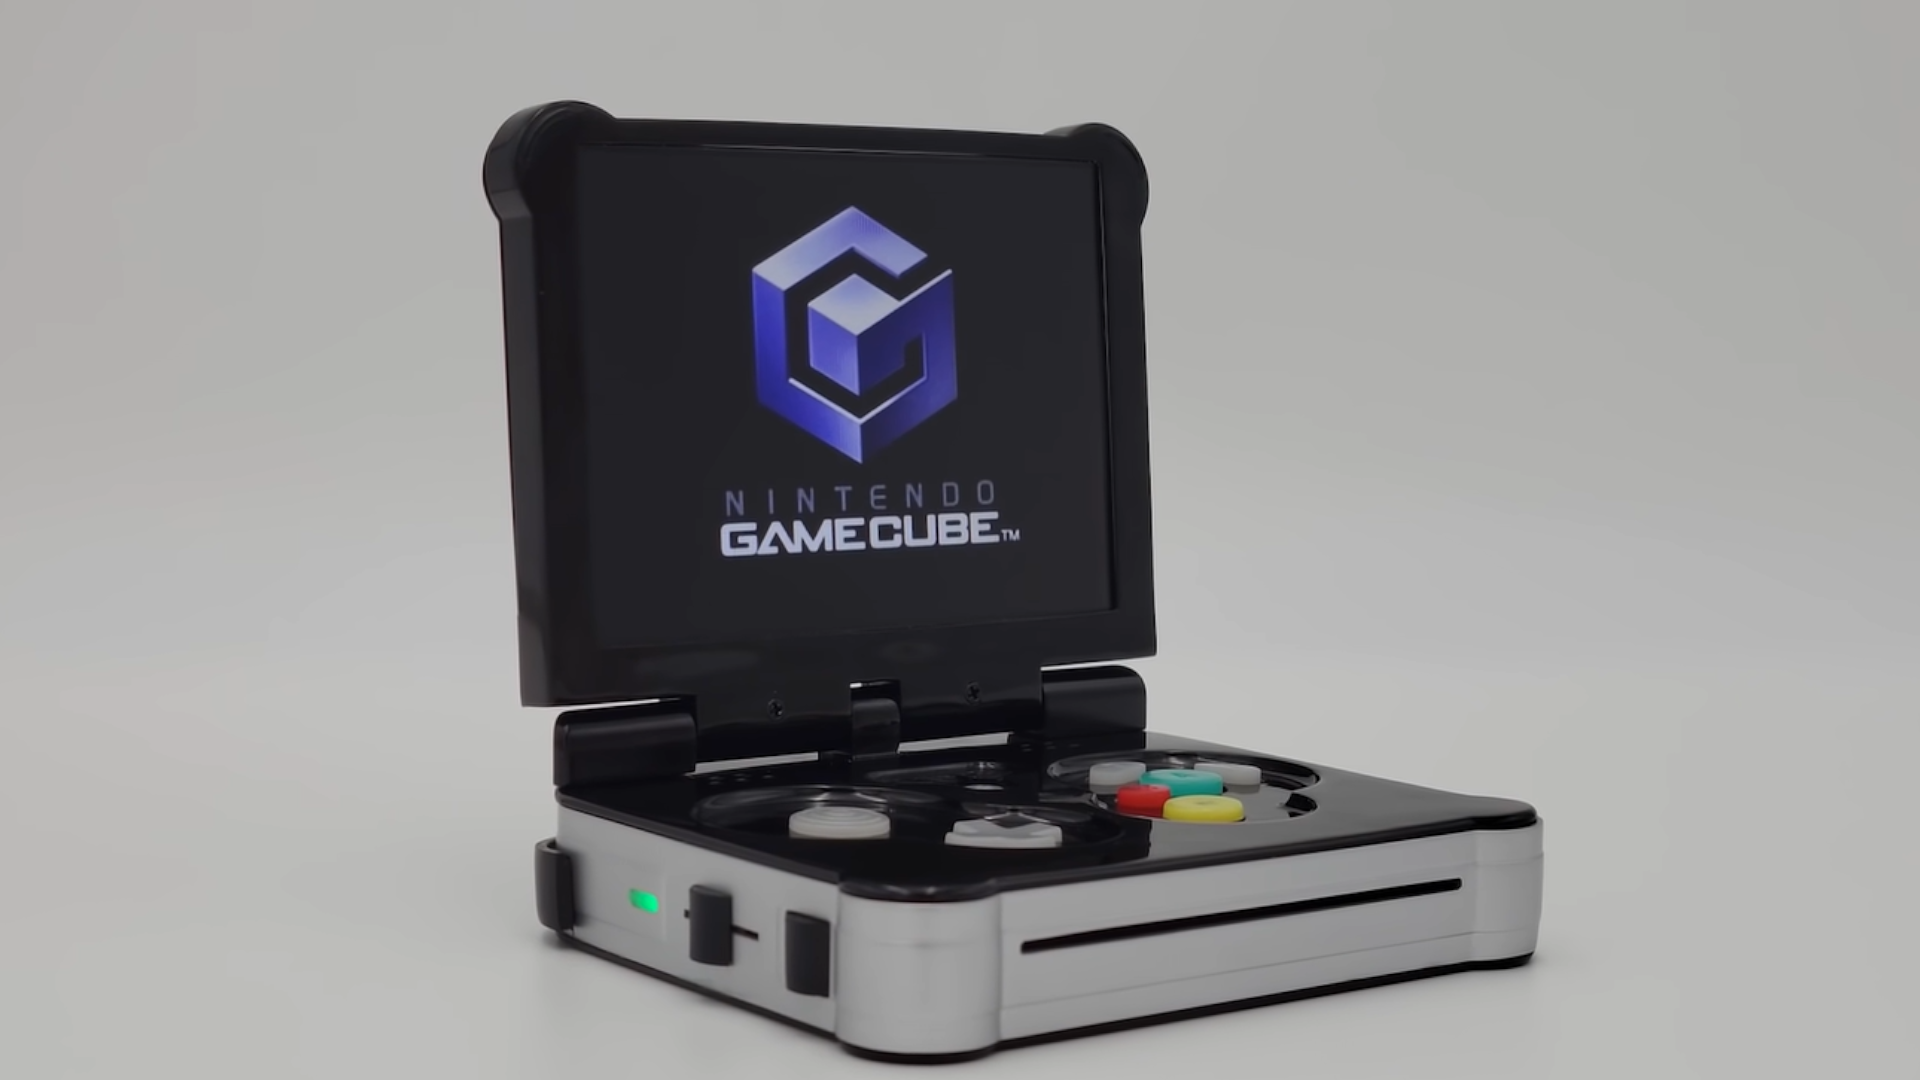 Was The GameCube Really A Portable Console In Disguise? - Talking Point